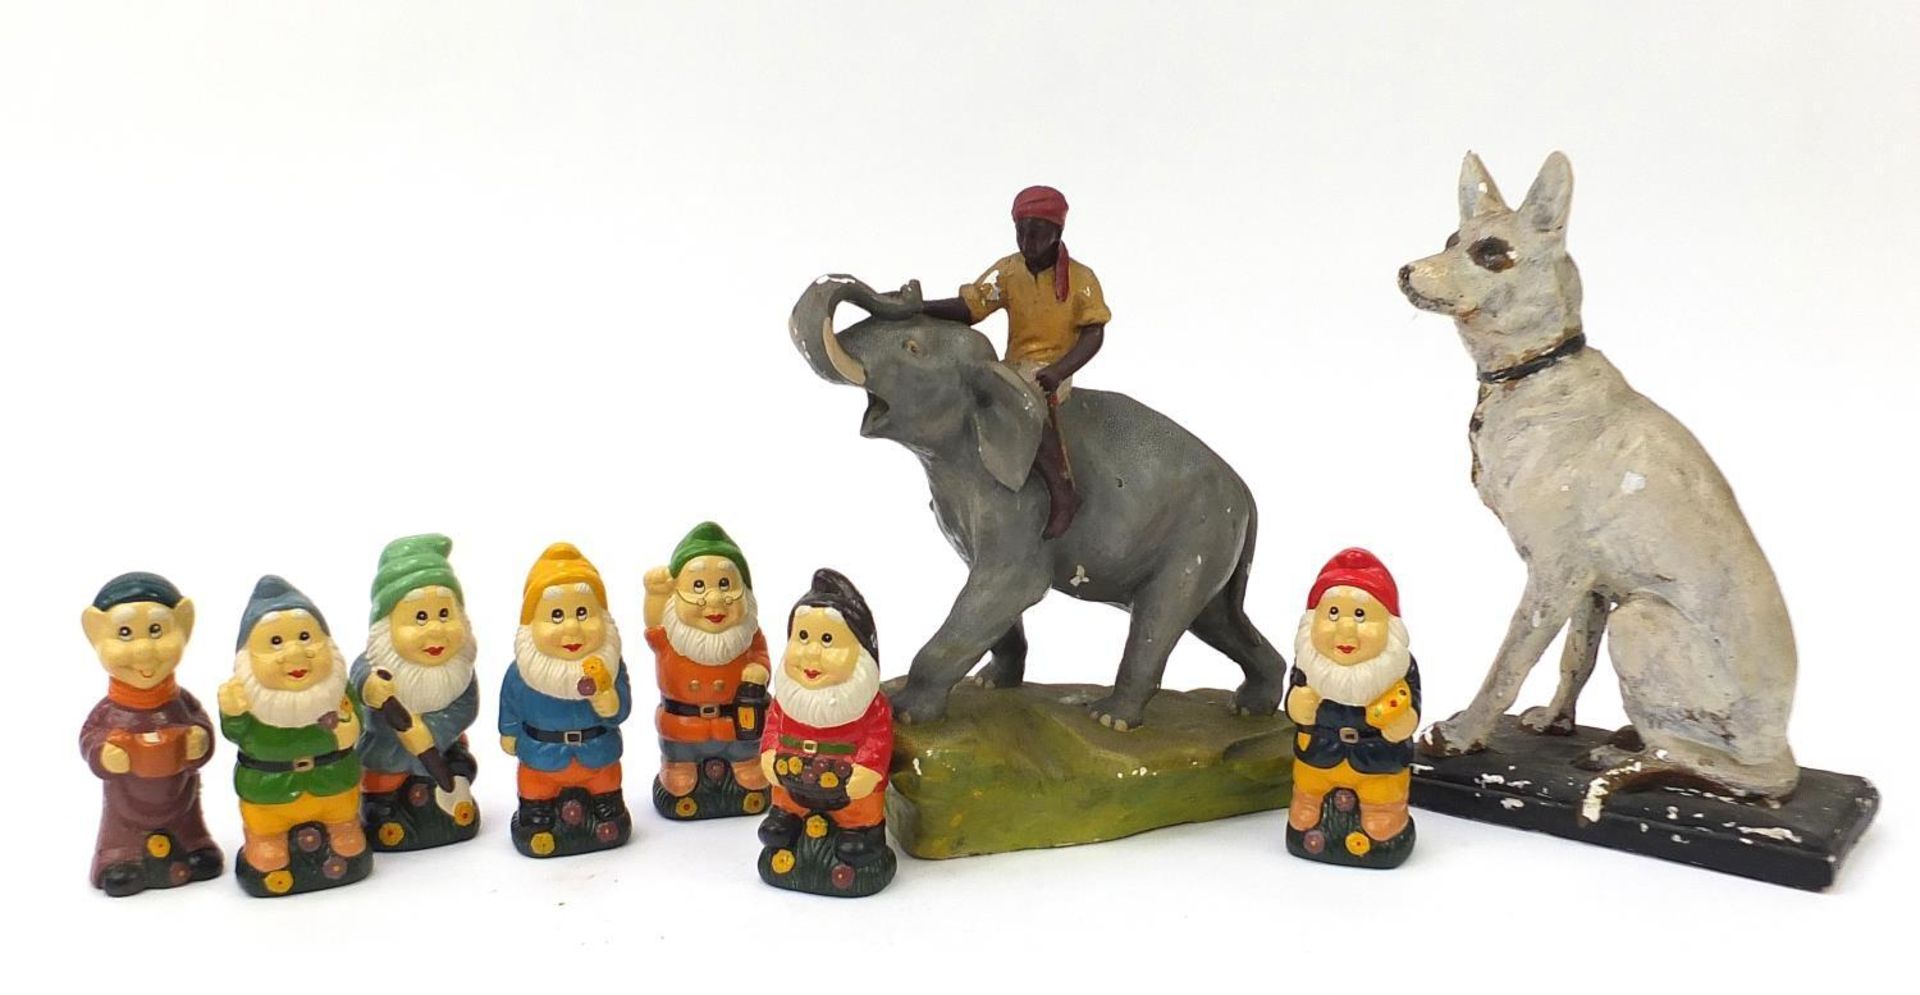 Hand painted plaster including figure on horseback and seven dwarfs, the largest 38cm high :